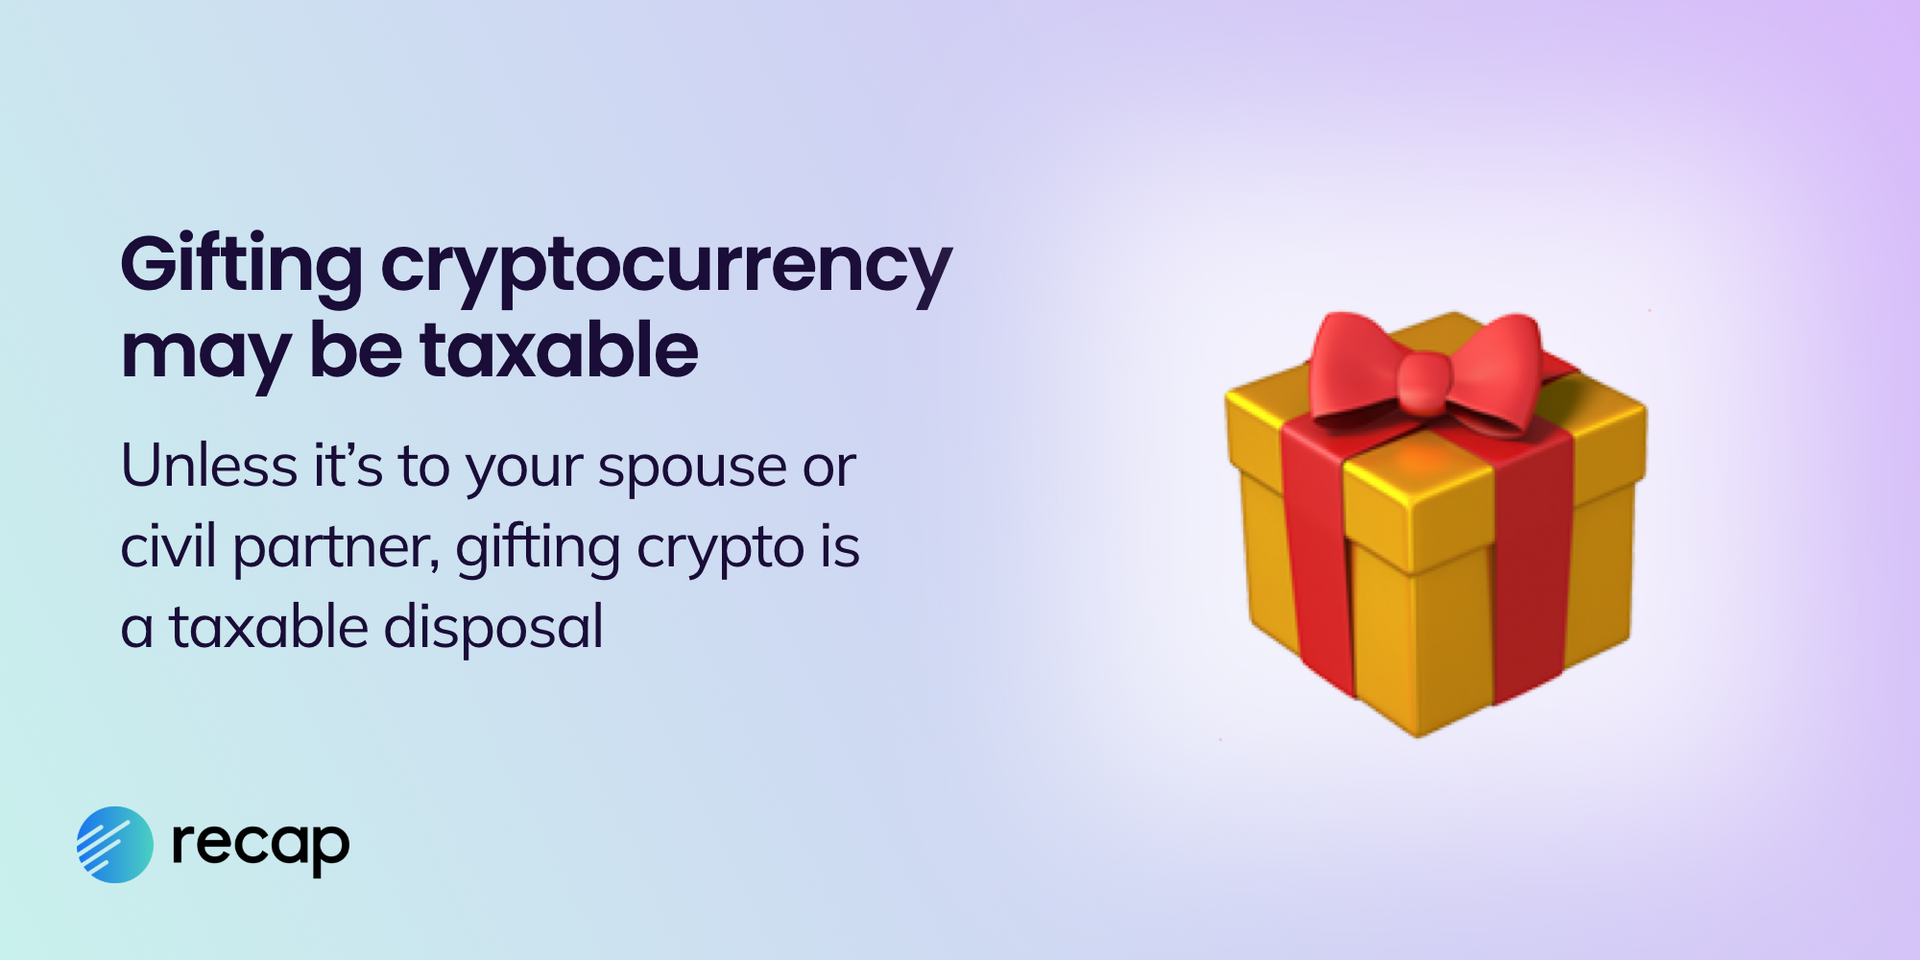 Infographic stating that gifting cryptocurrency may be taxable unless it is to your spouse or civil partner